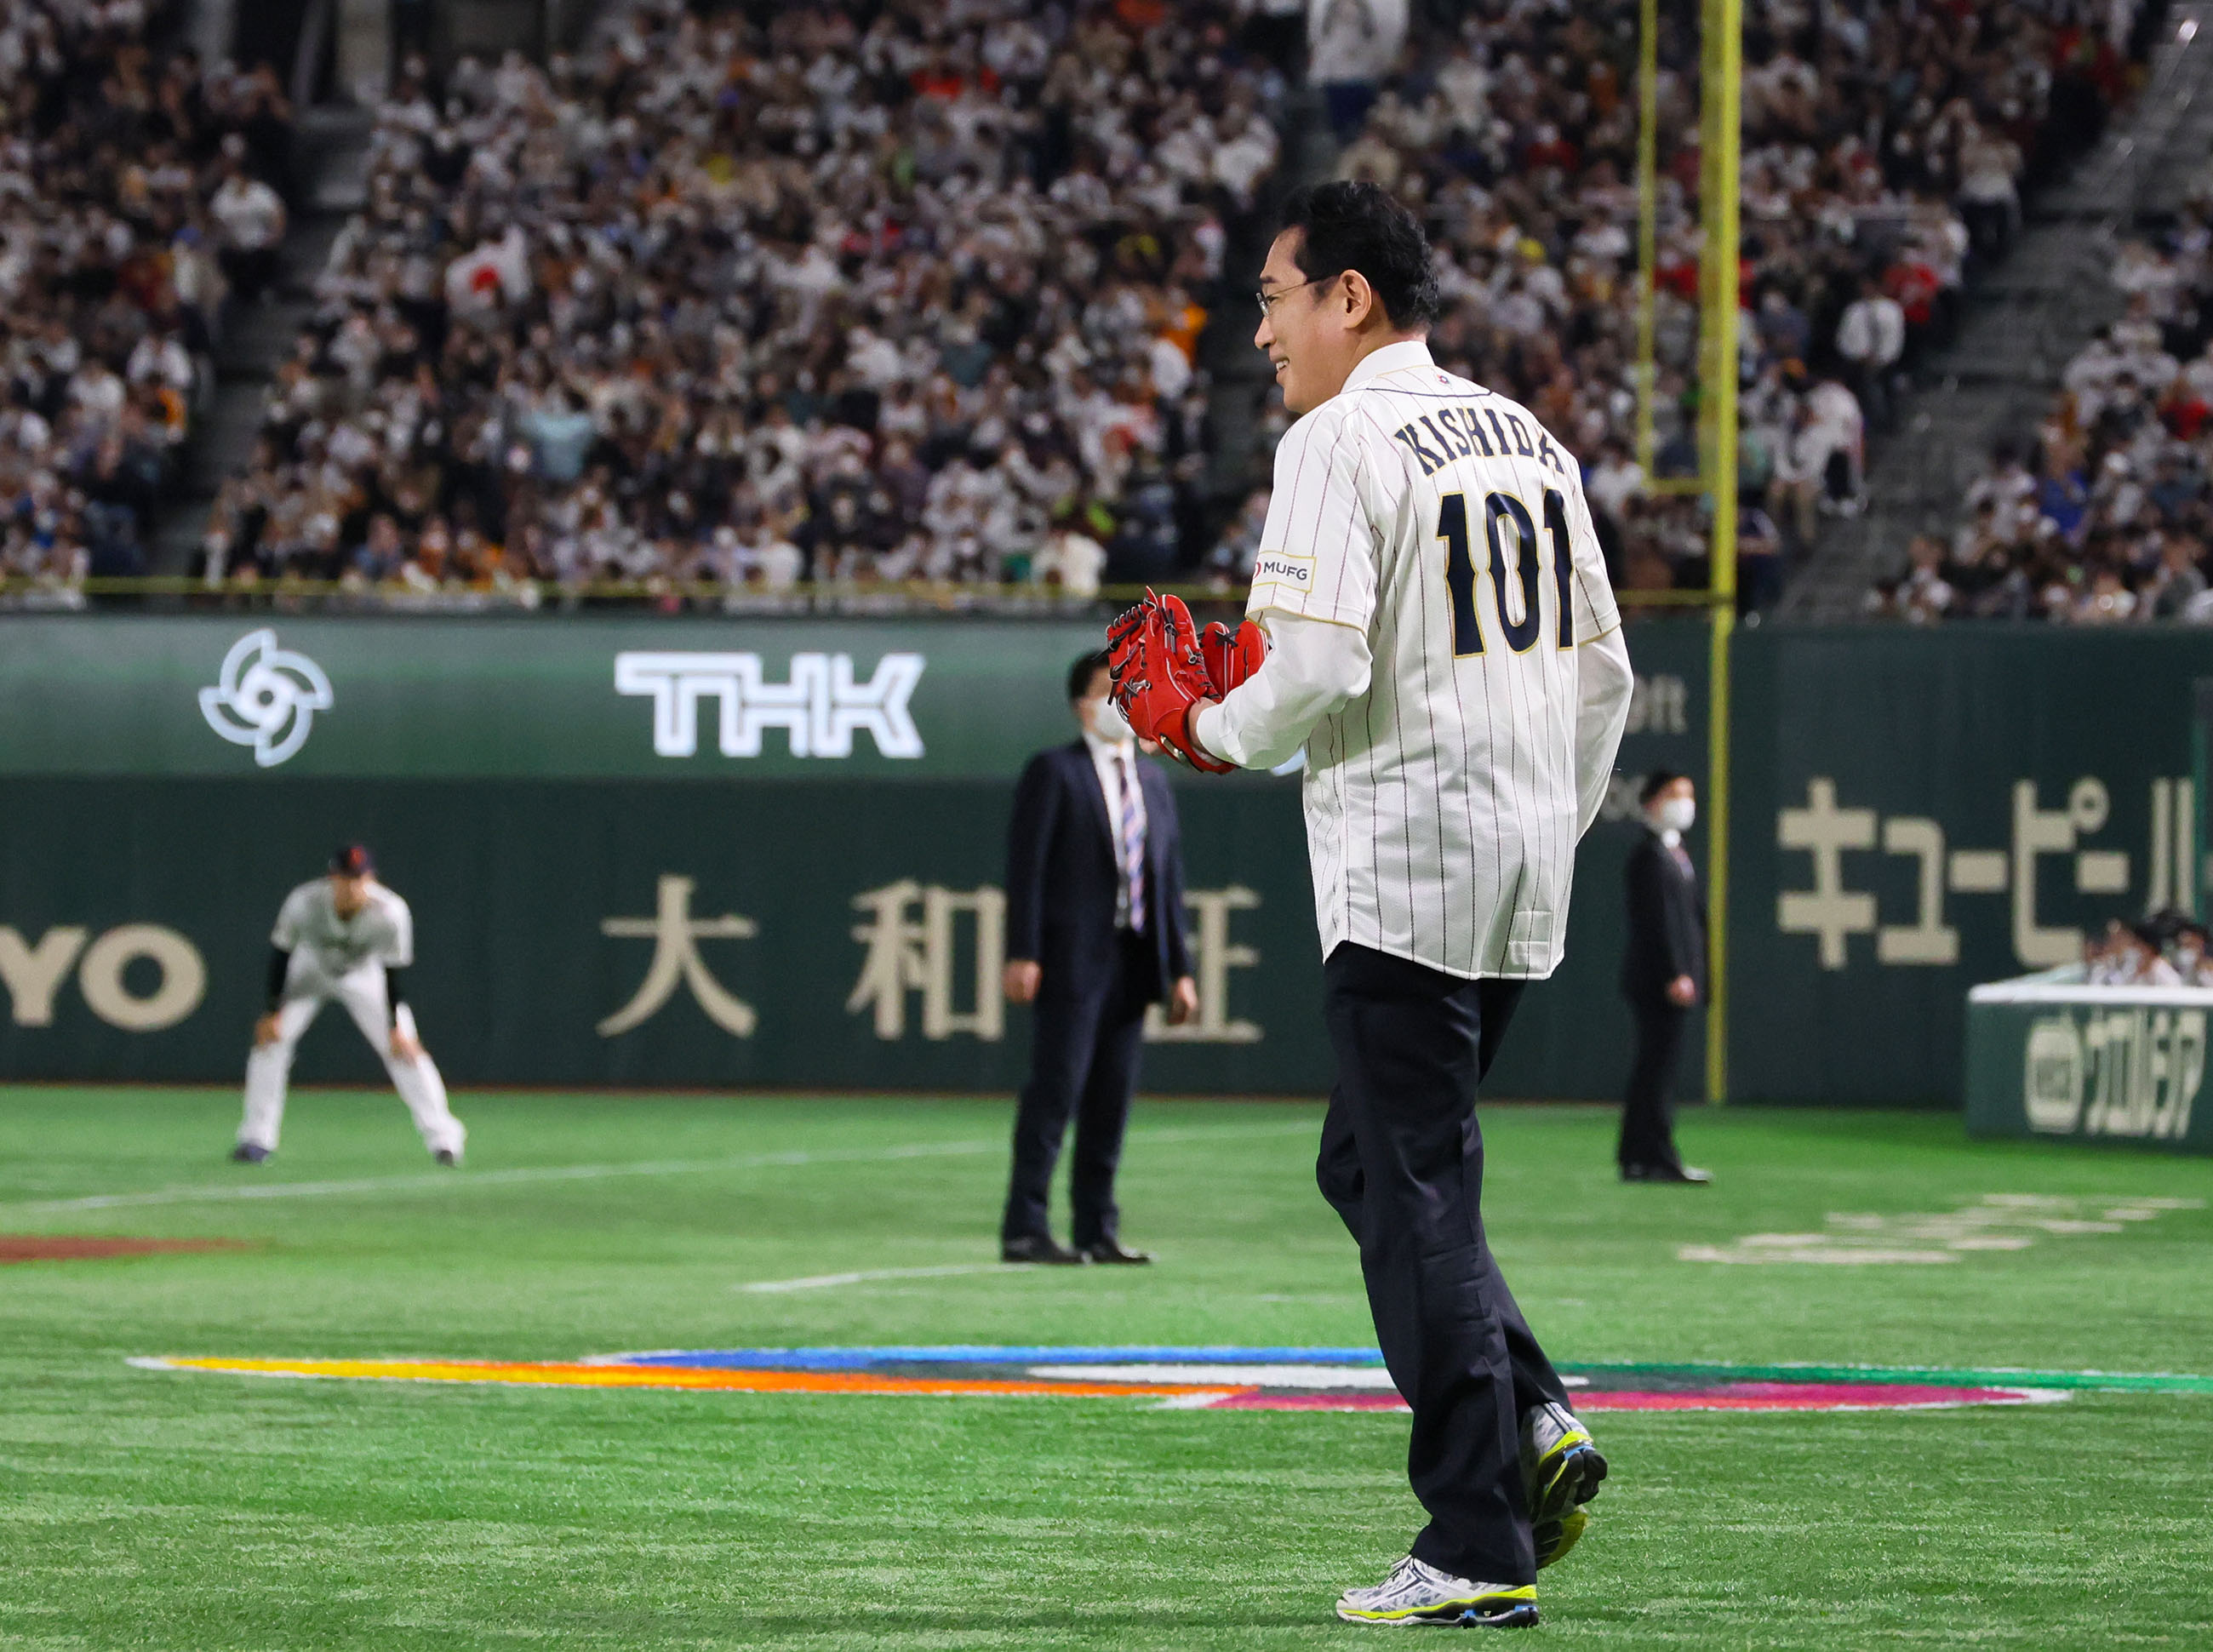 Prime Minister Kishida throwing out the ceremonial first pitch (1)